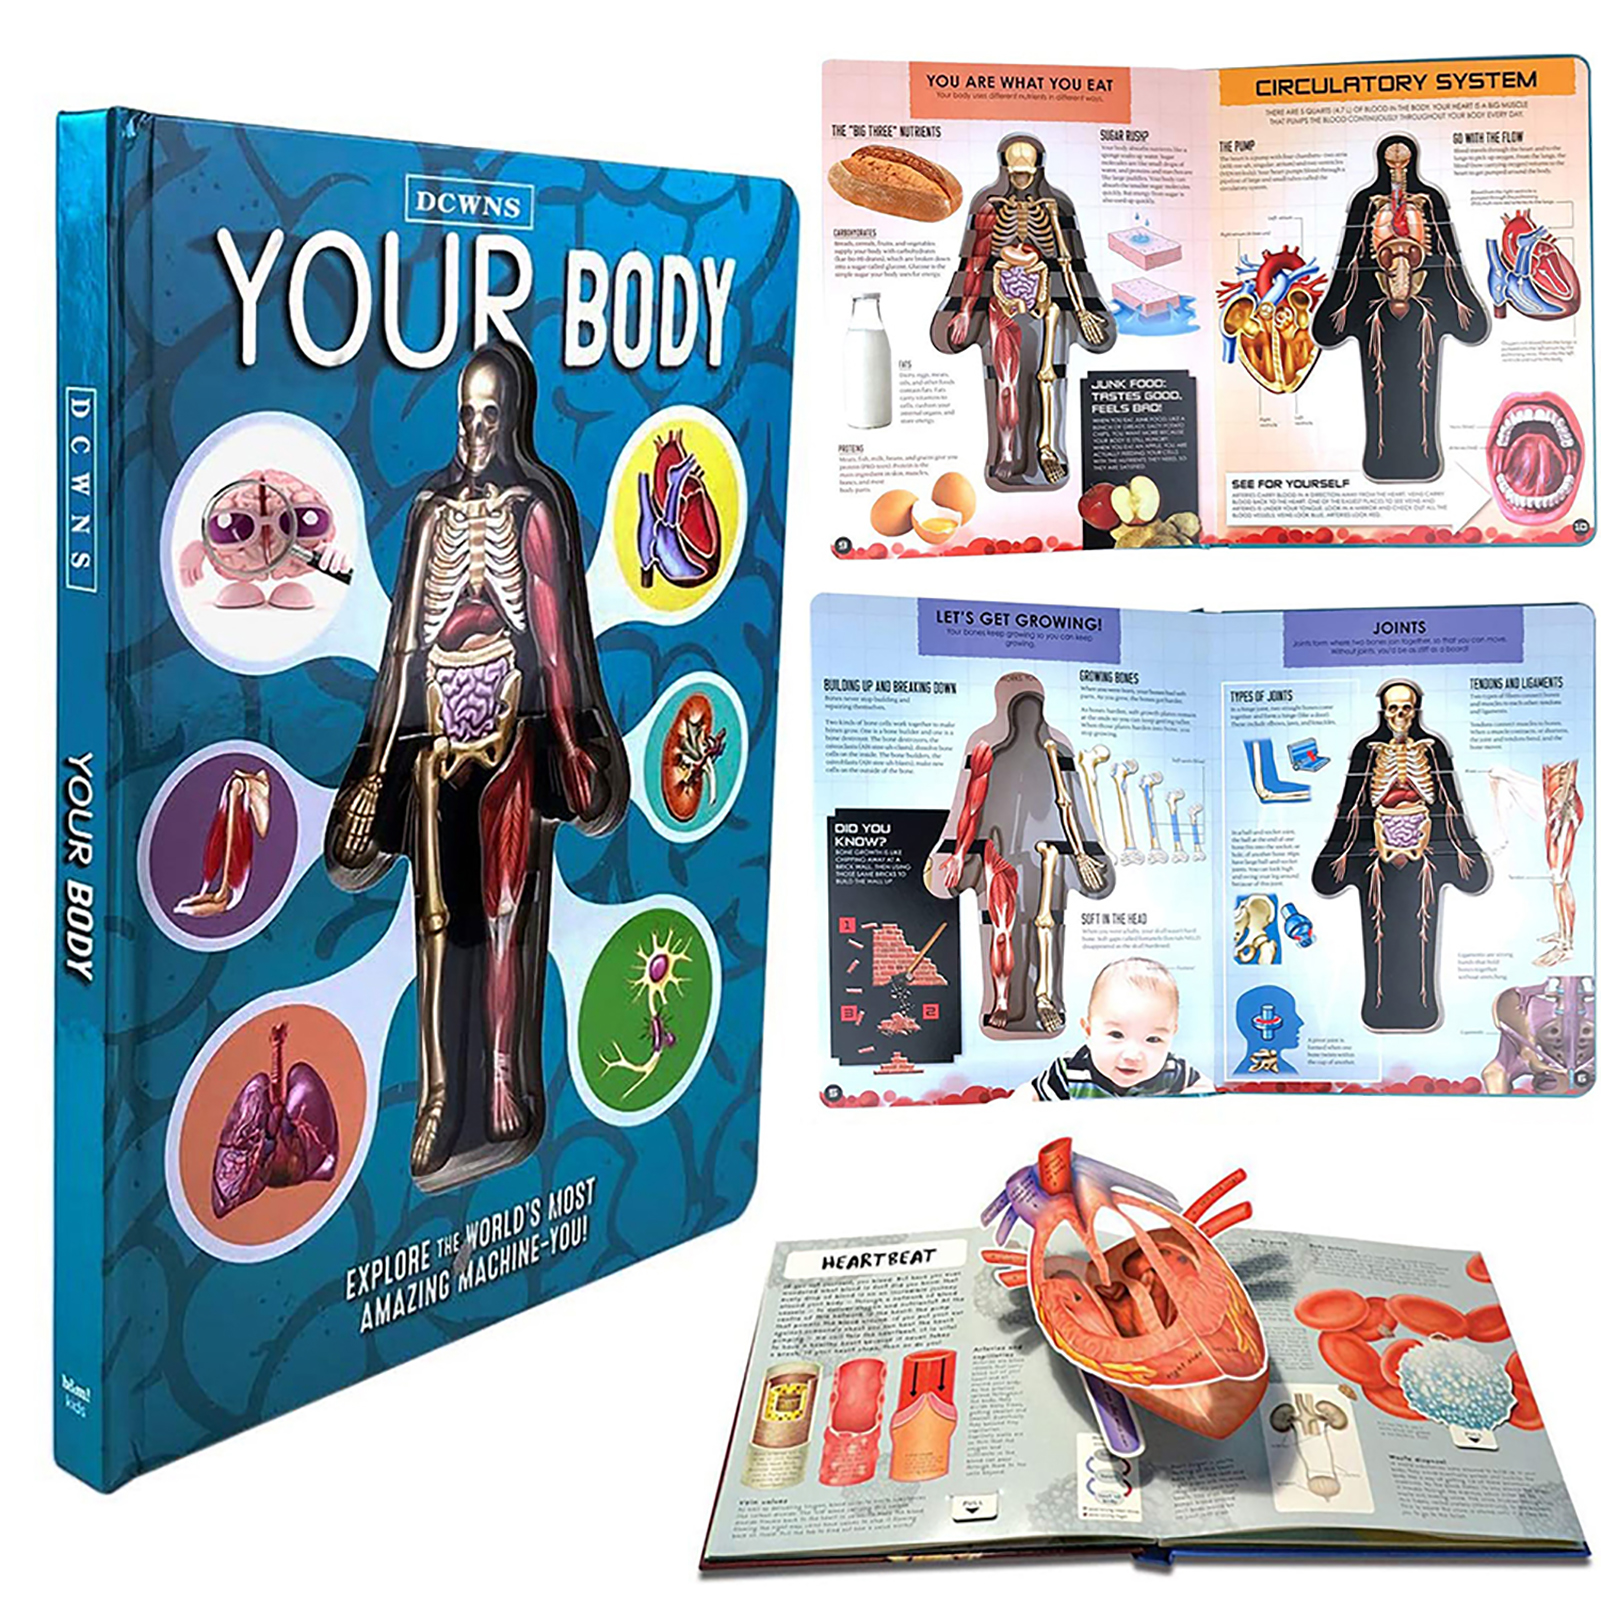 3D Picture Human Body Structure Book Anatomy Science Cognitive Reading Children Early Education Books and Human Torso Model hot